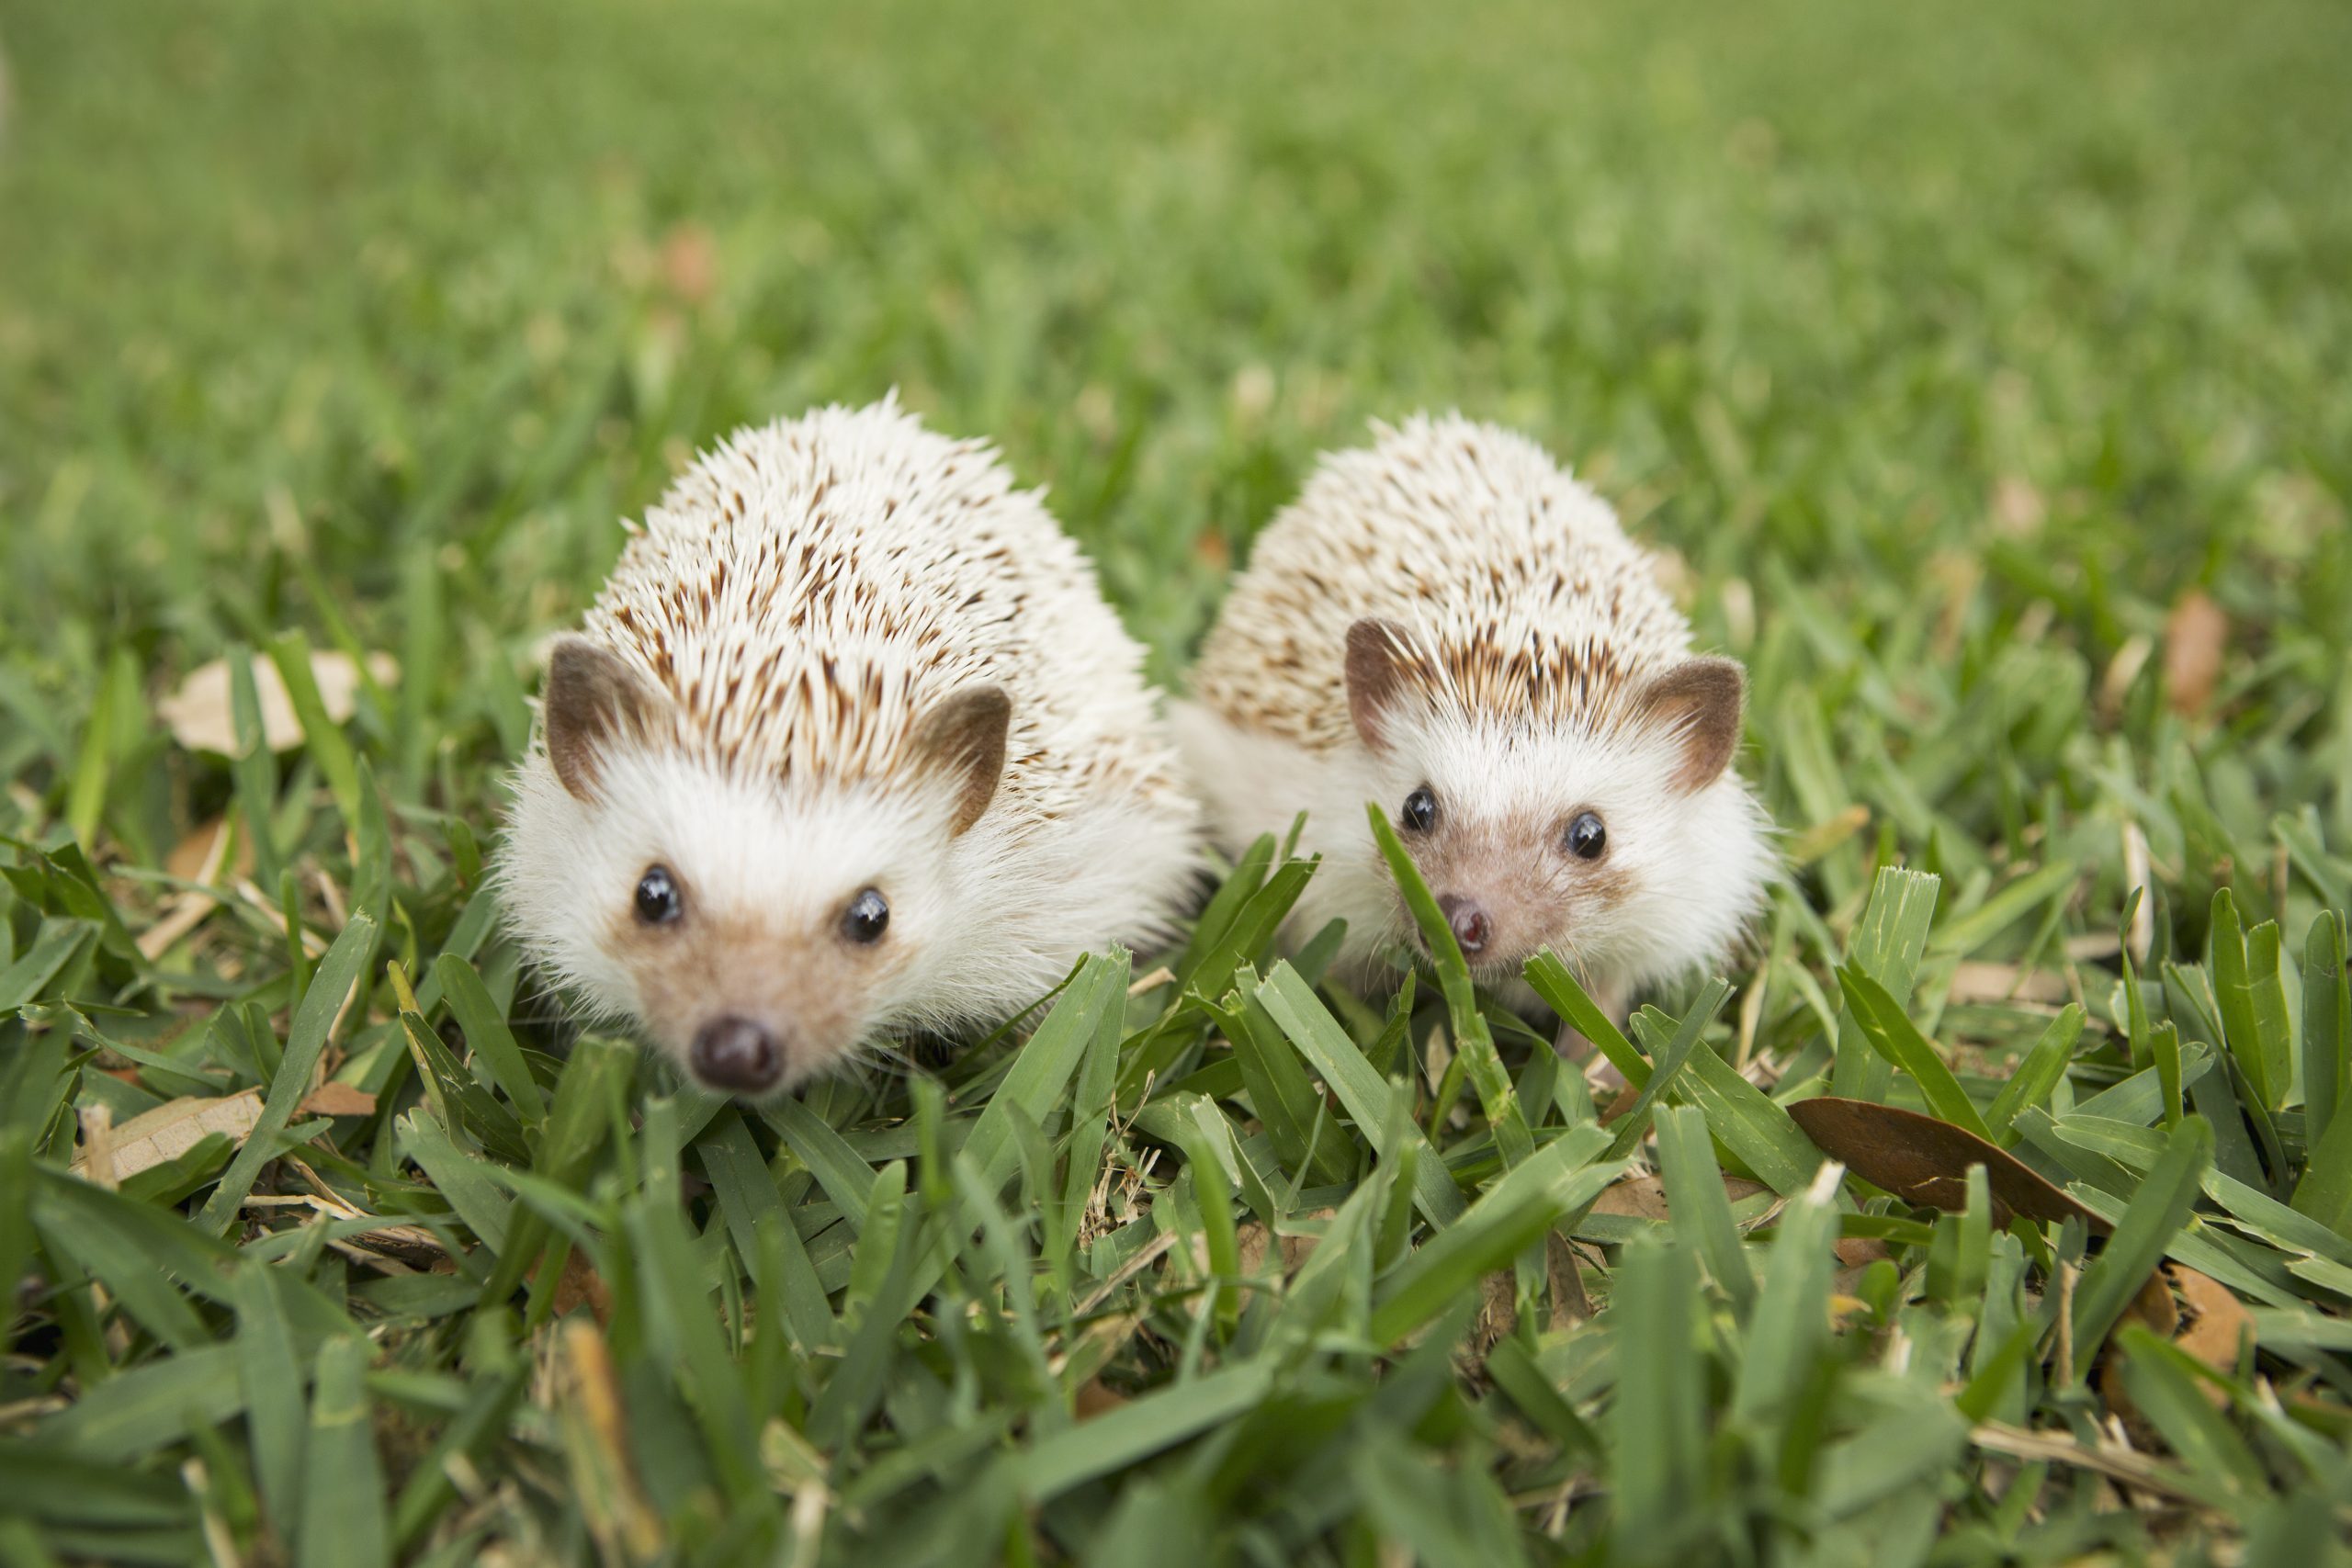 Two hedgehogs on the grass.